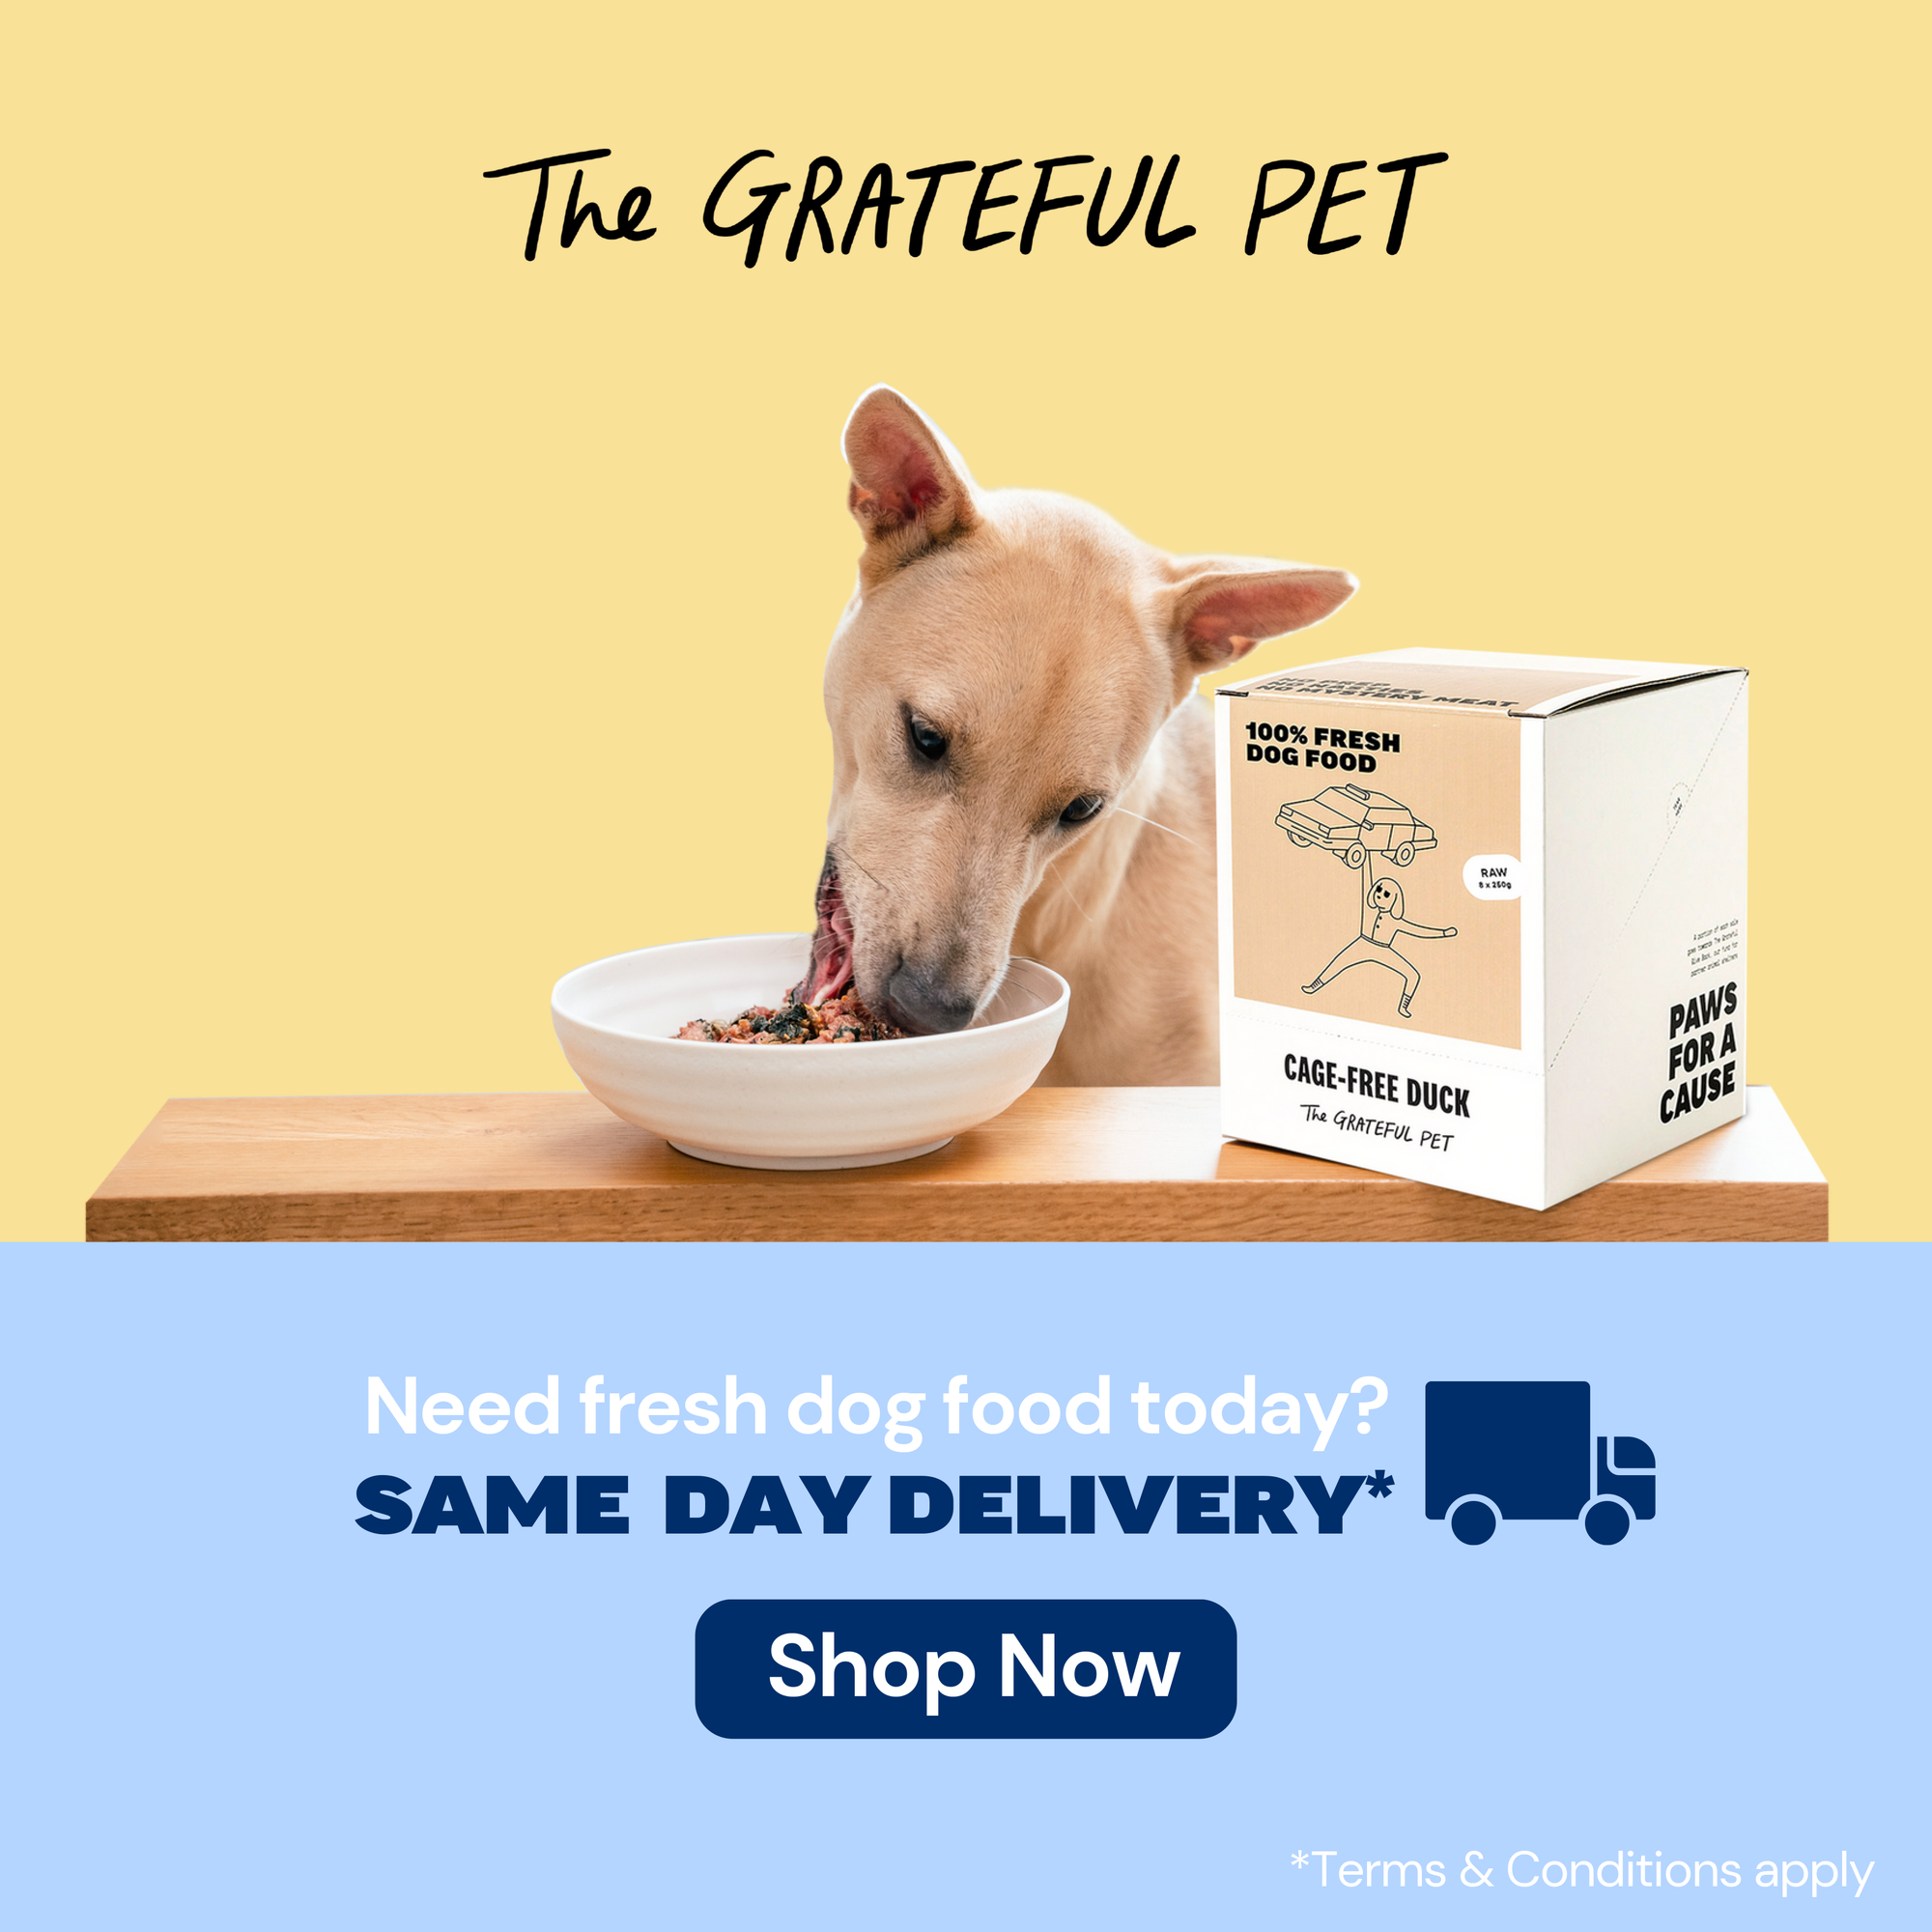 Buy The Grateful Pet Dog Food With Same-Day Delivery | Singapore's Best Online Pet Store: Good Dog People